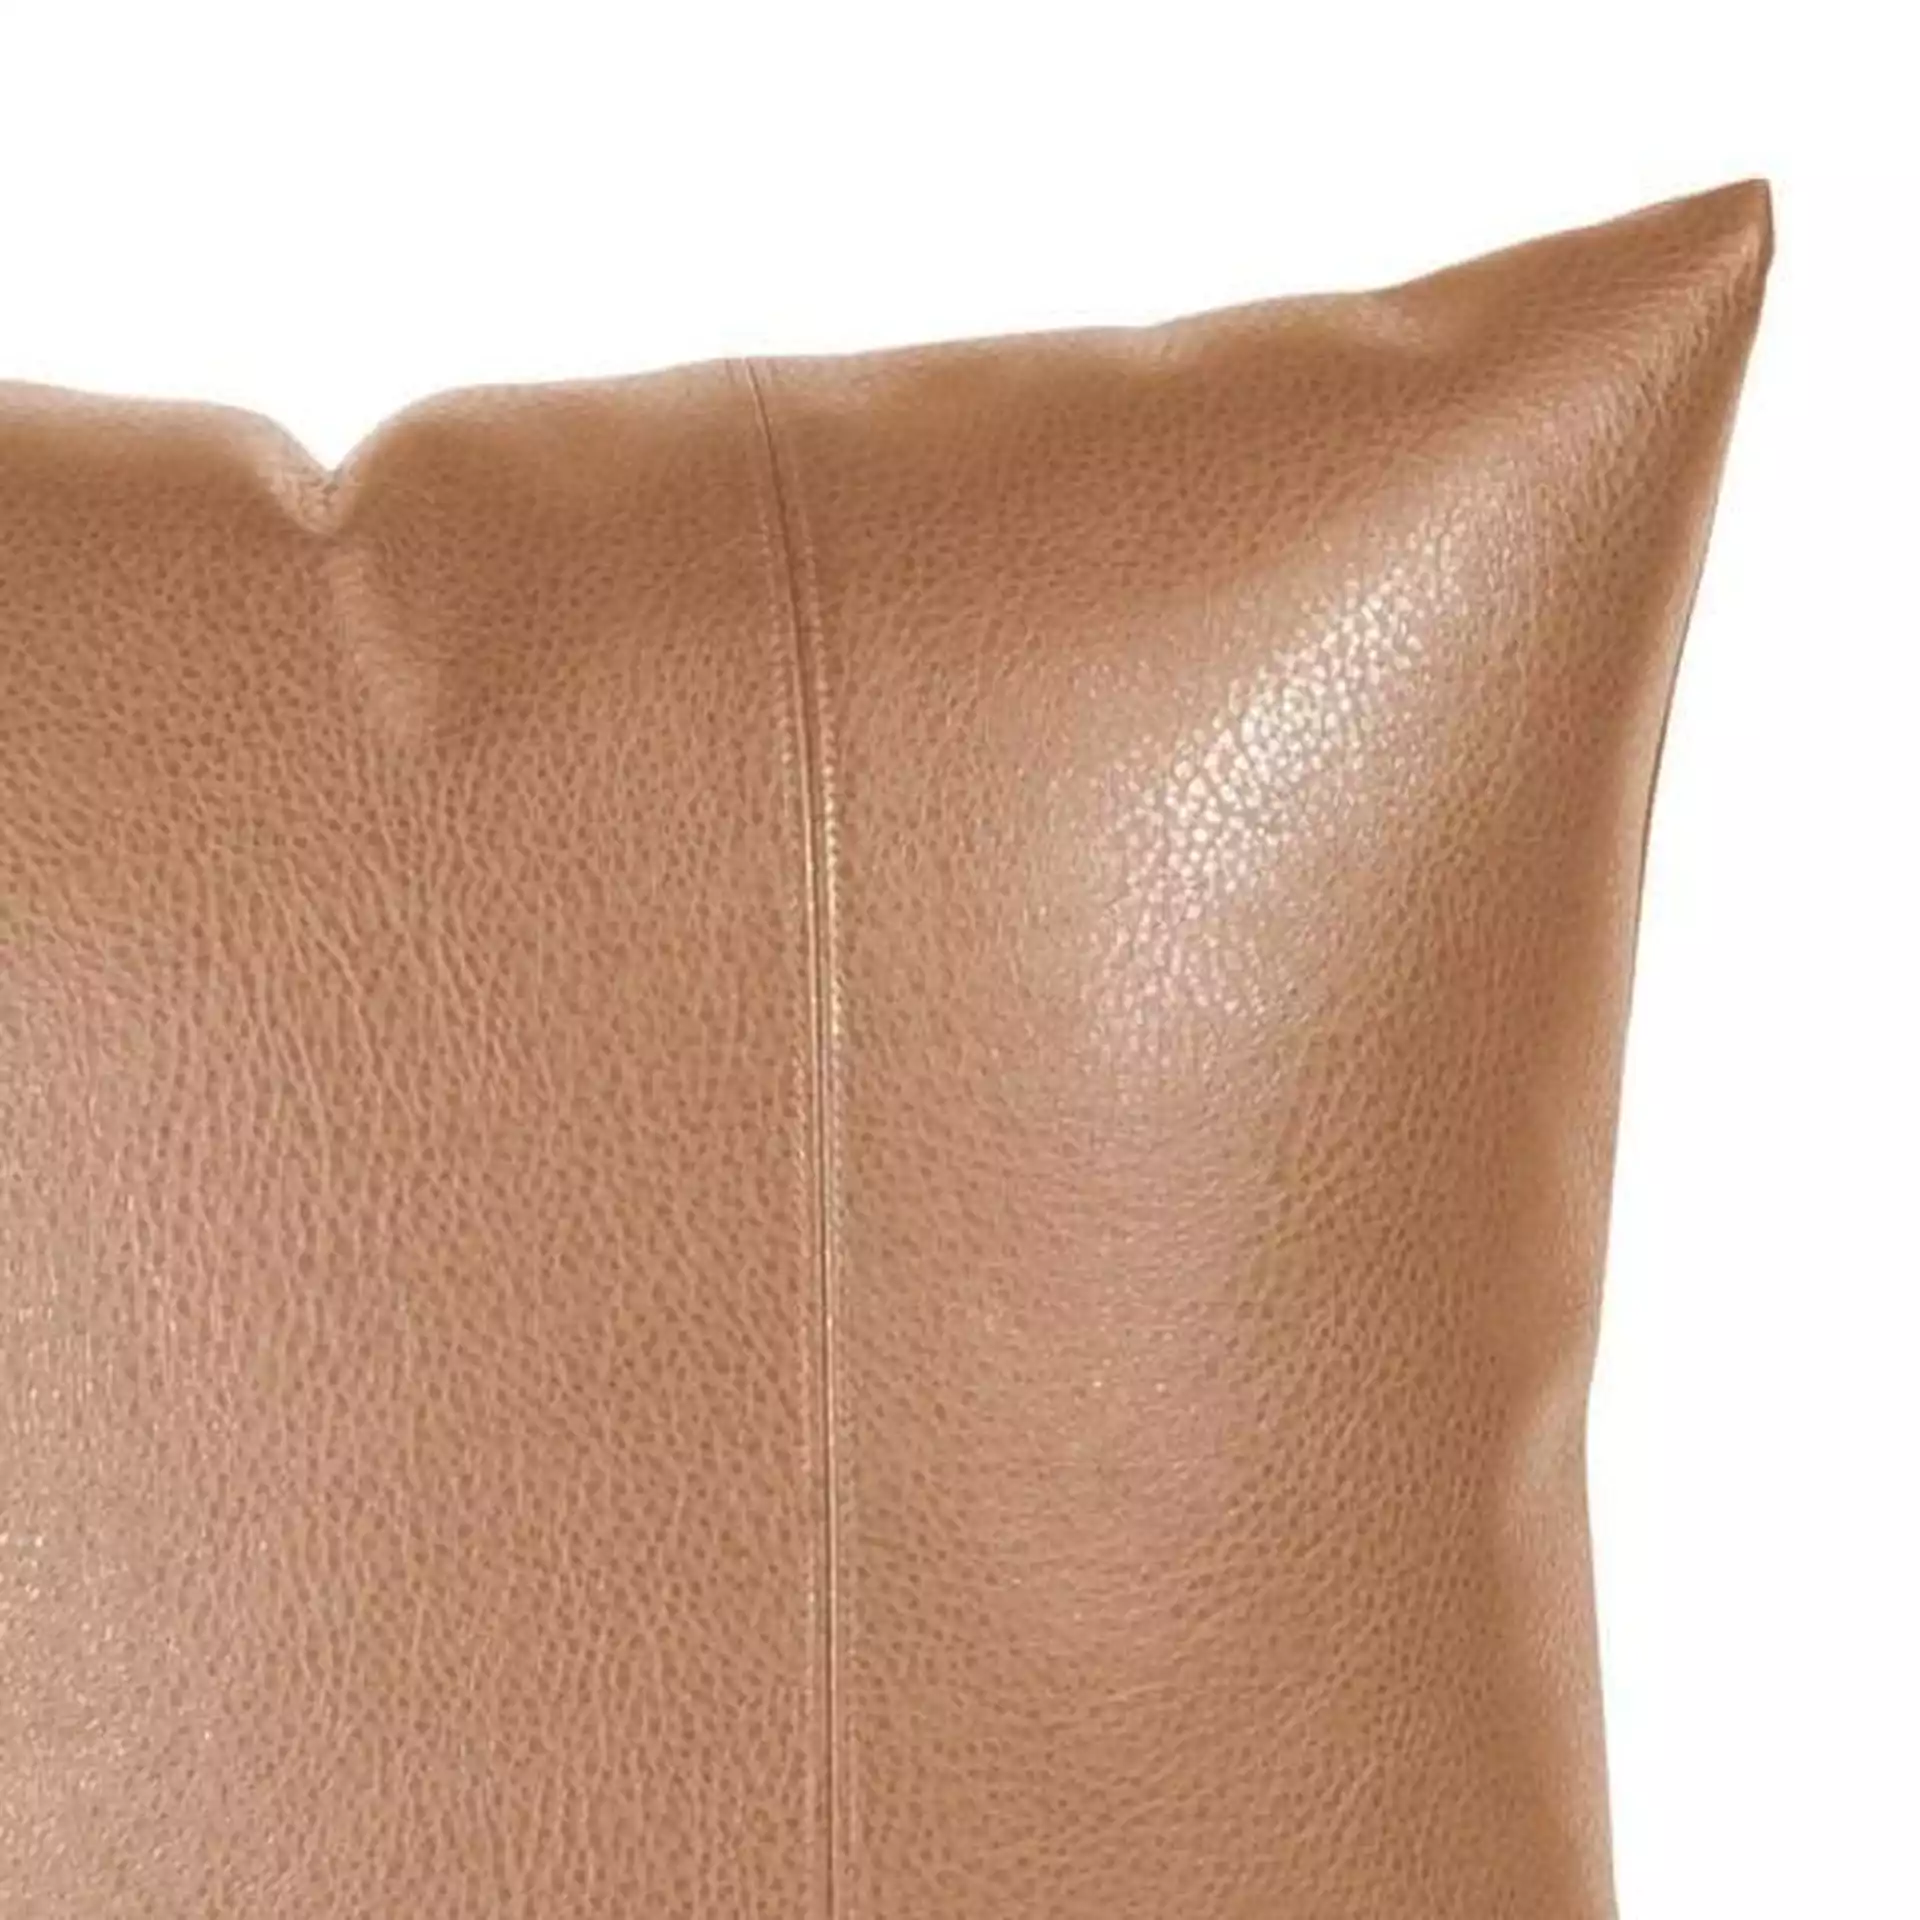 Avanti Solid Polyester Throw Pillow, Browns/Tans, 22" x 11"